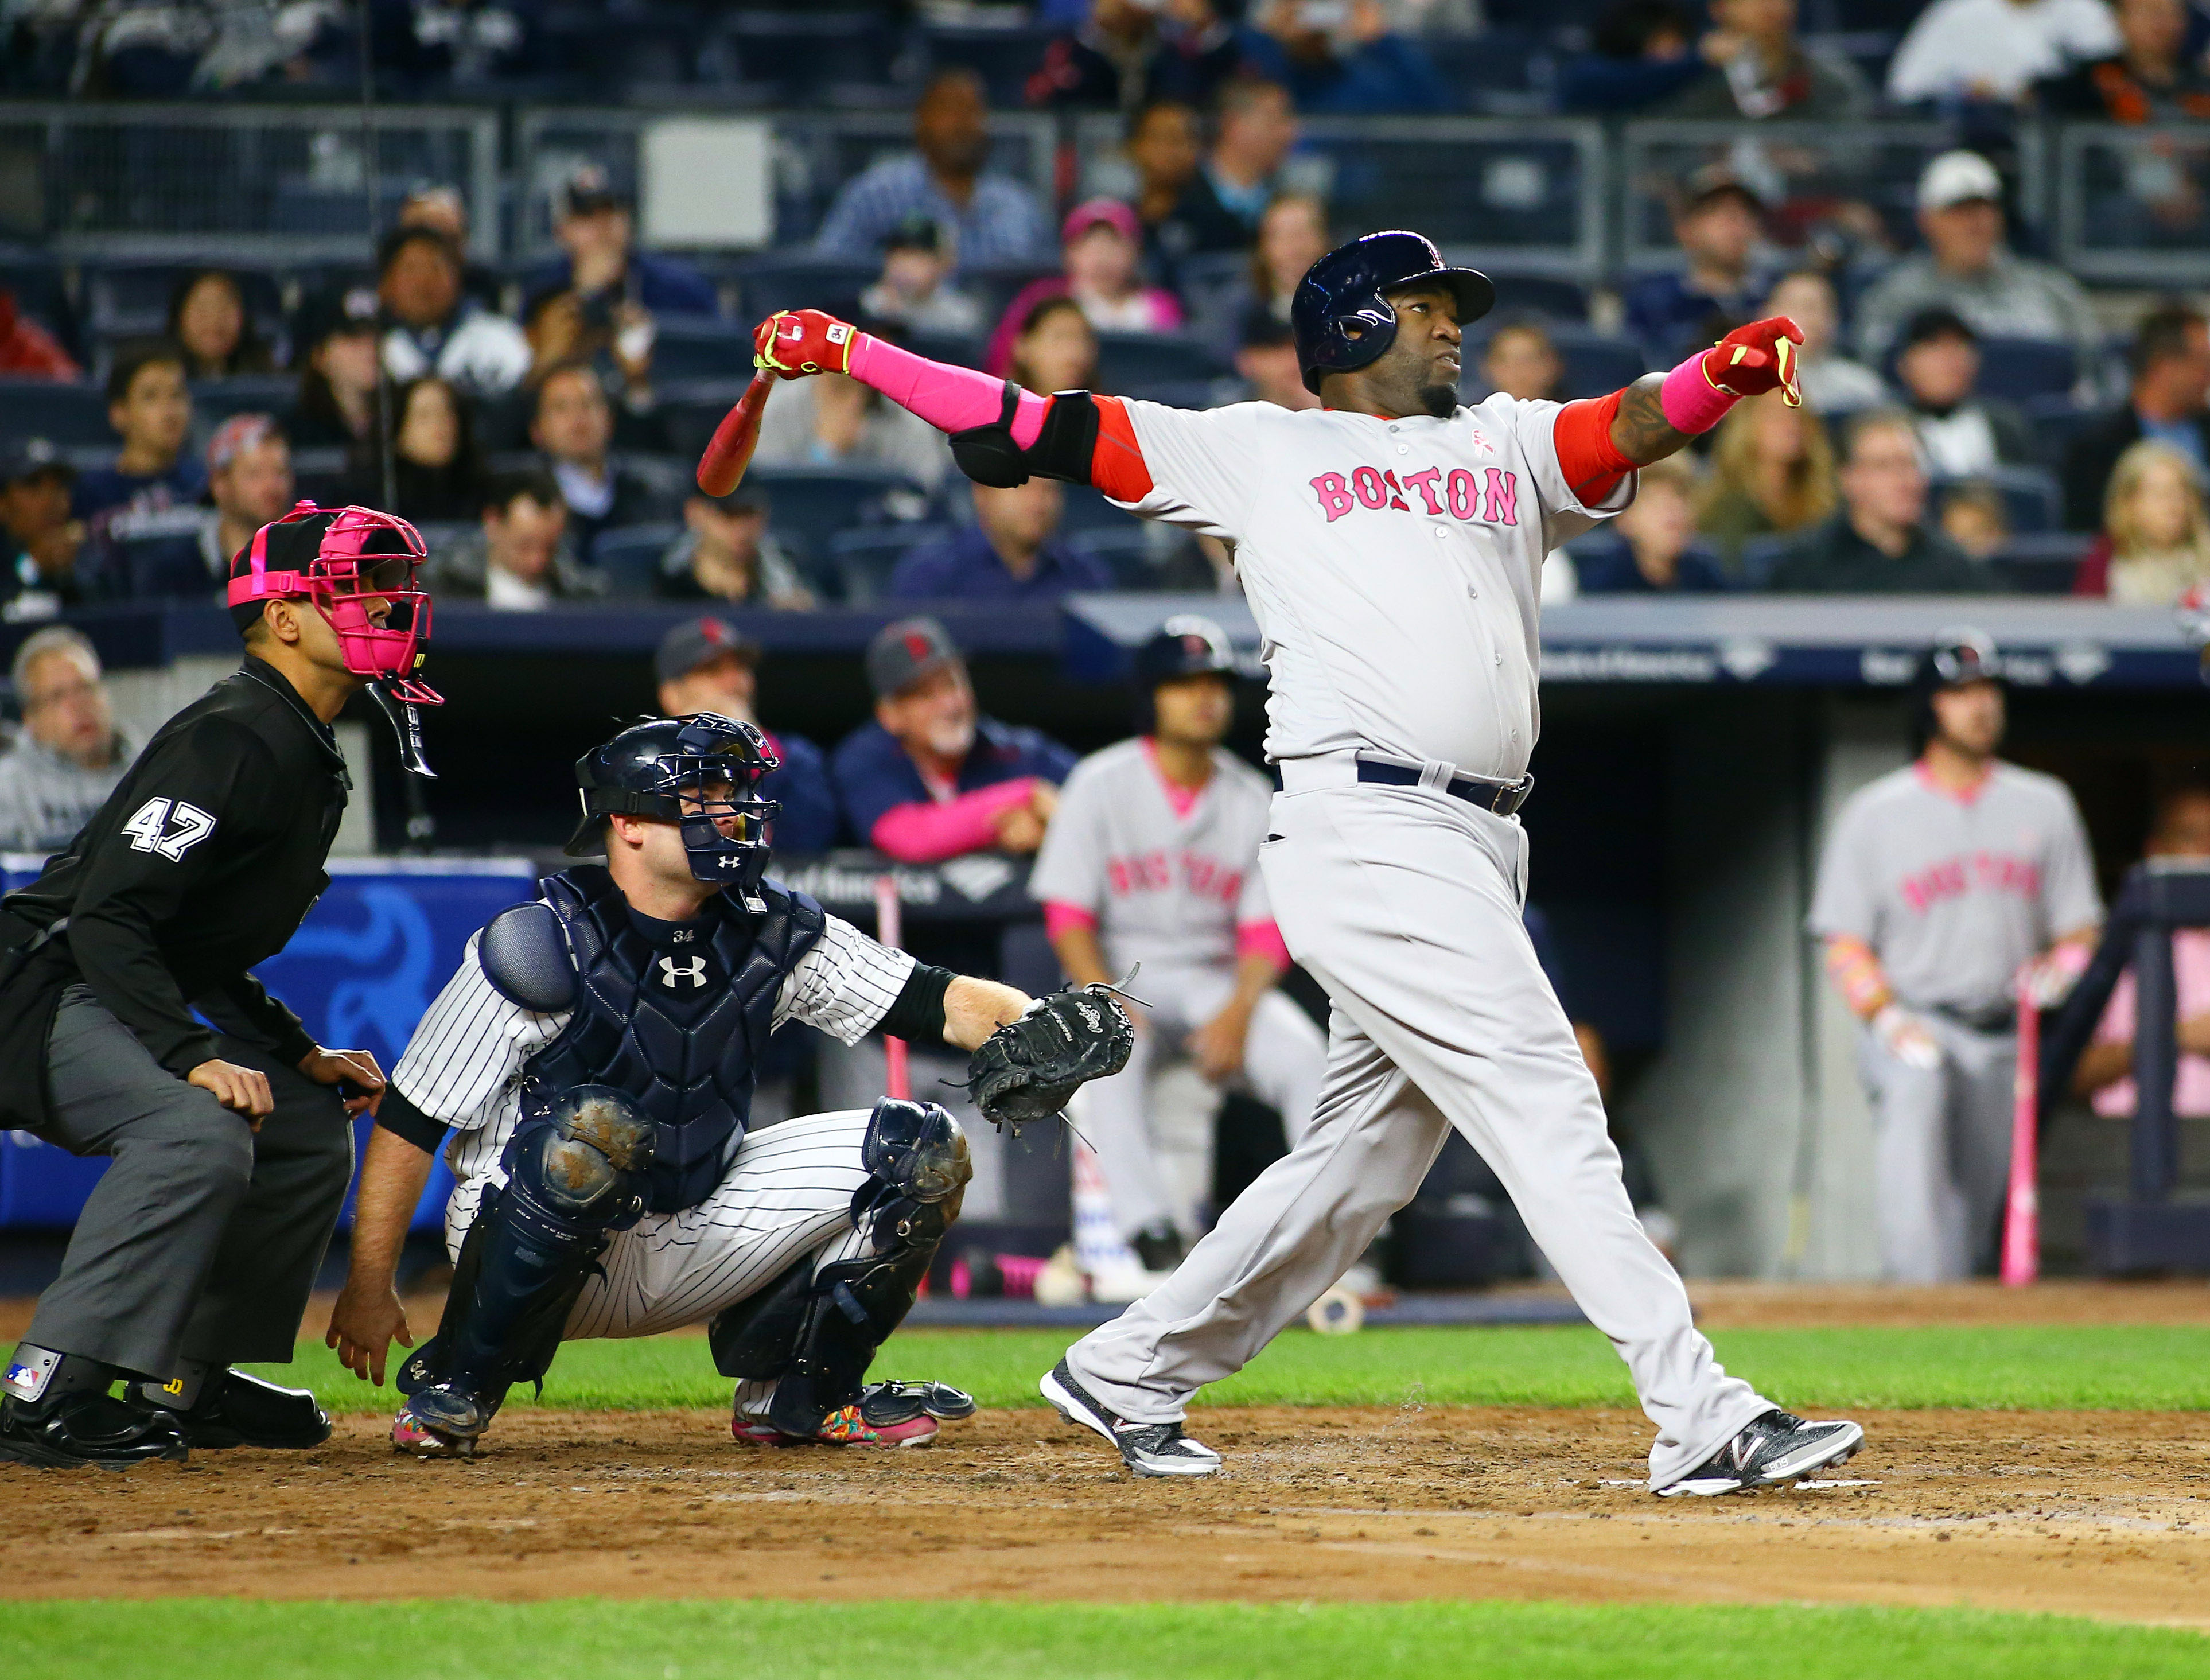 Big Papi has a big night and Wright goes the distance as Sox avoid sweep